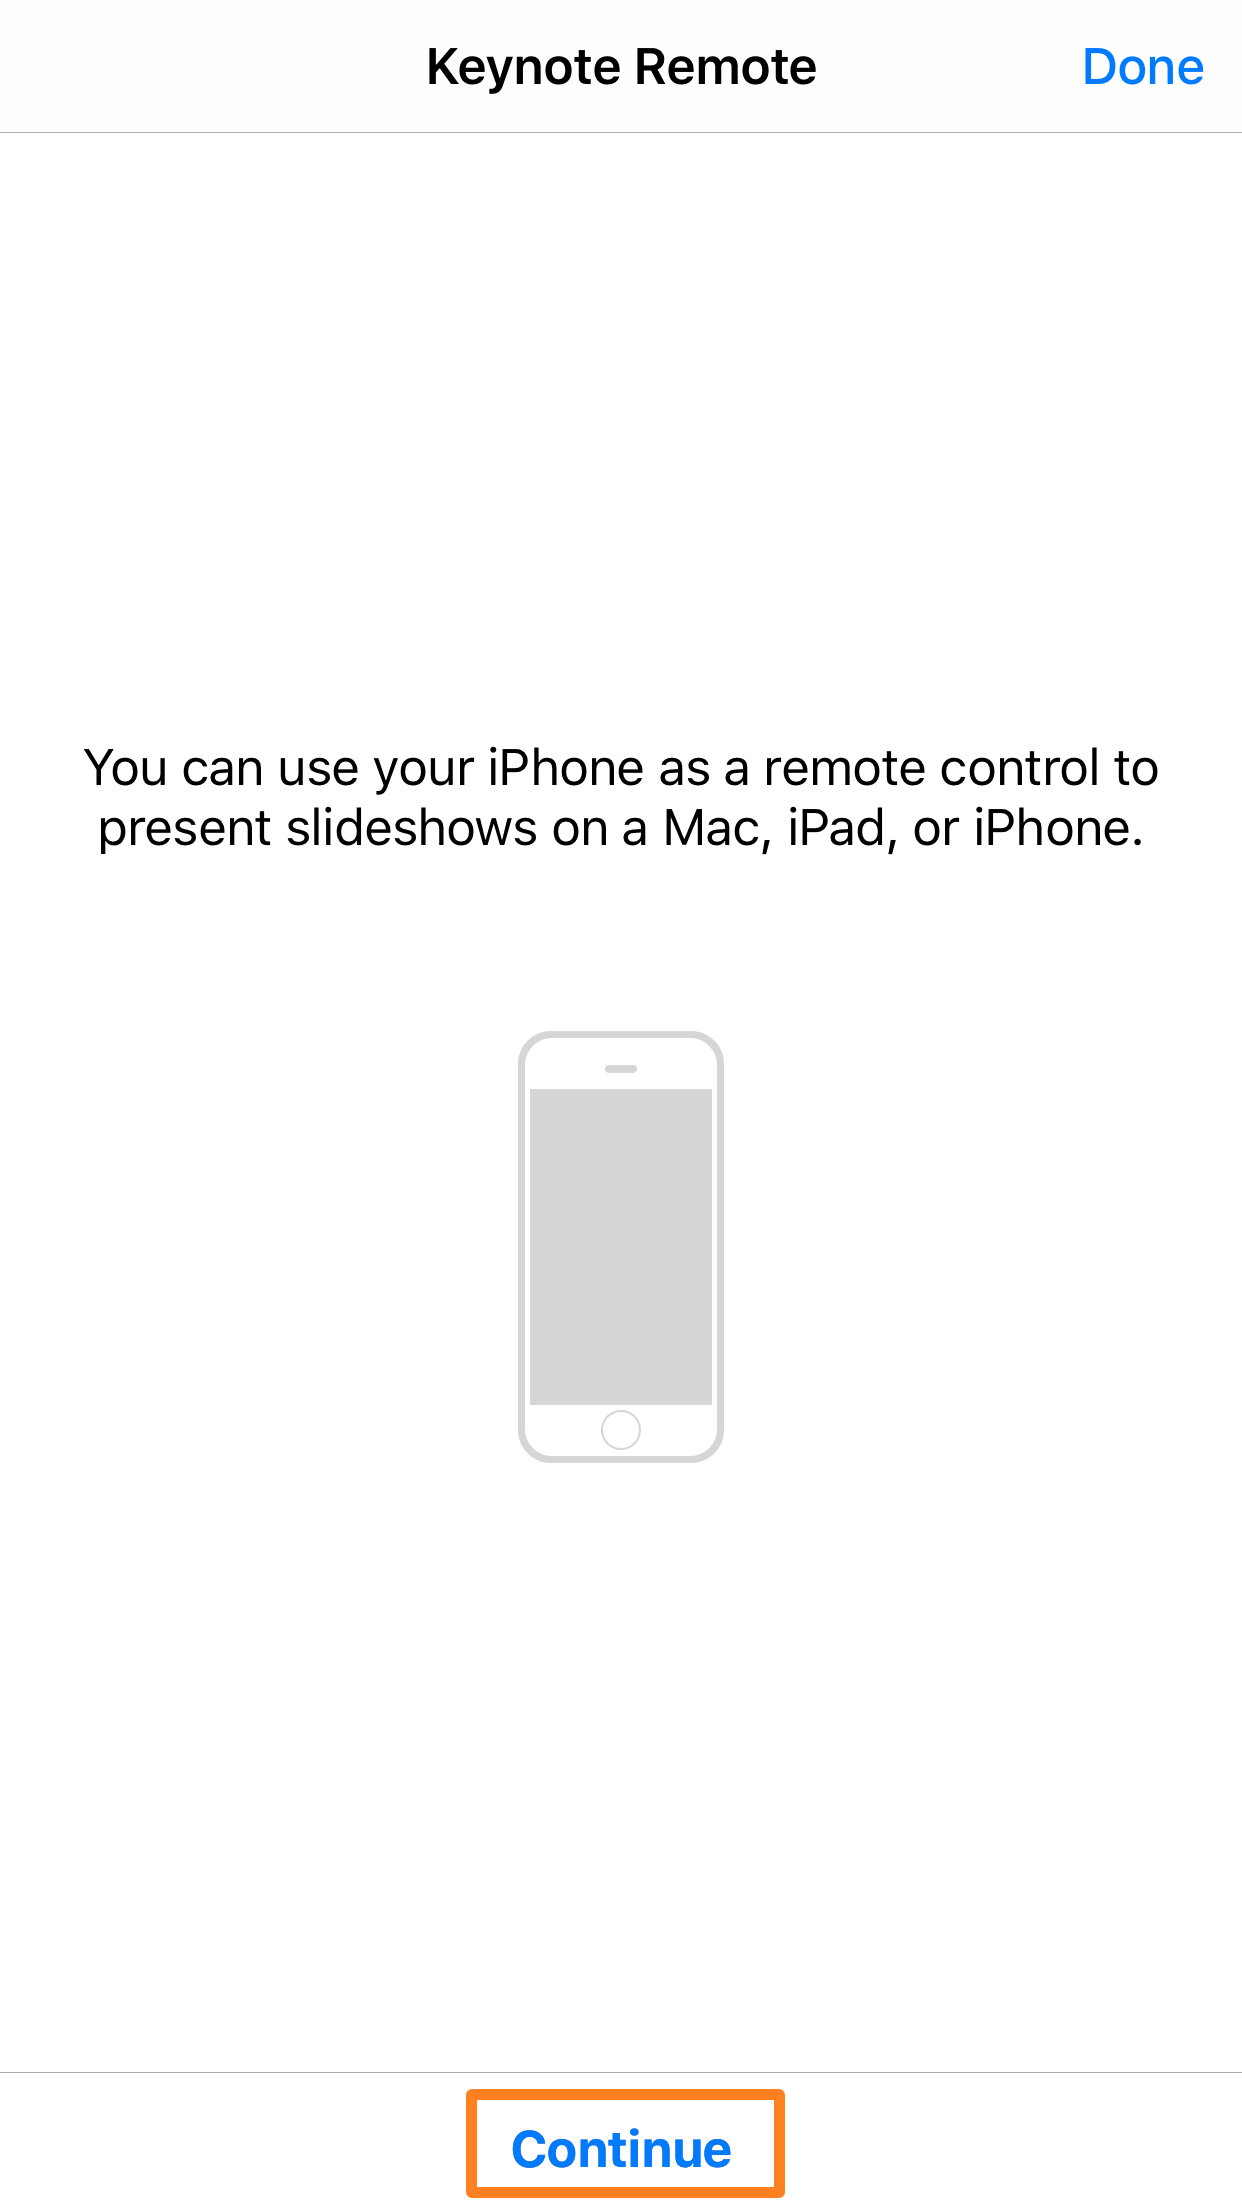 Connect your iPhone to your MacBook to use Keynote Remote if you don’t have a Wi-Fi network handy